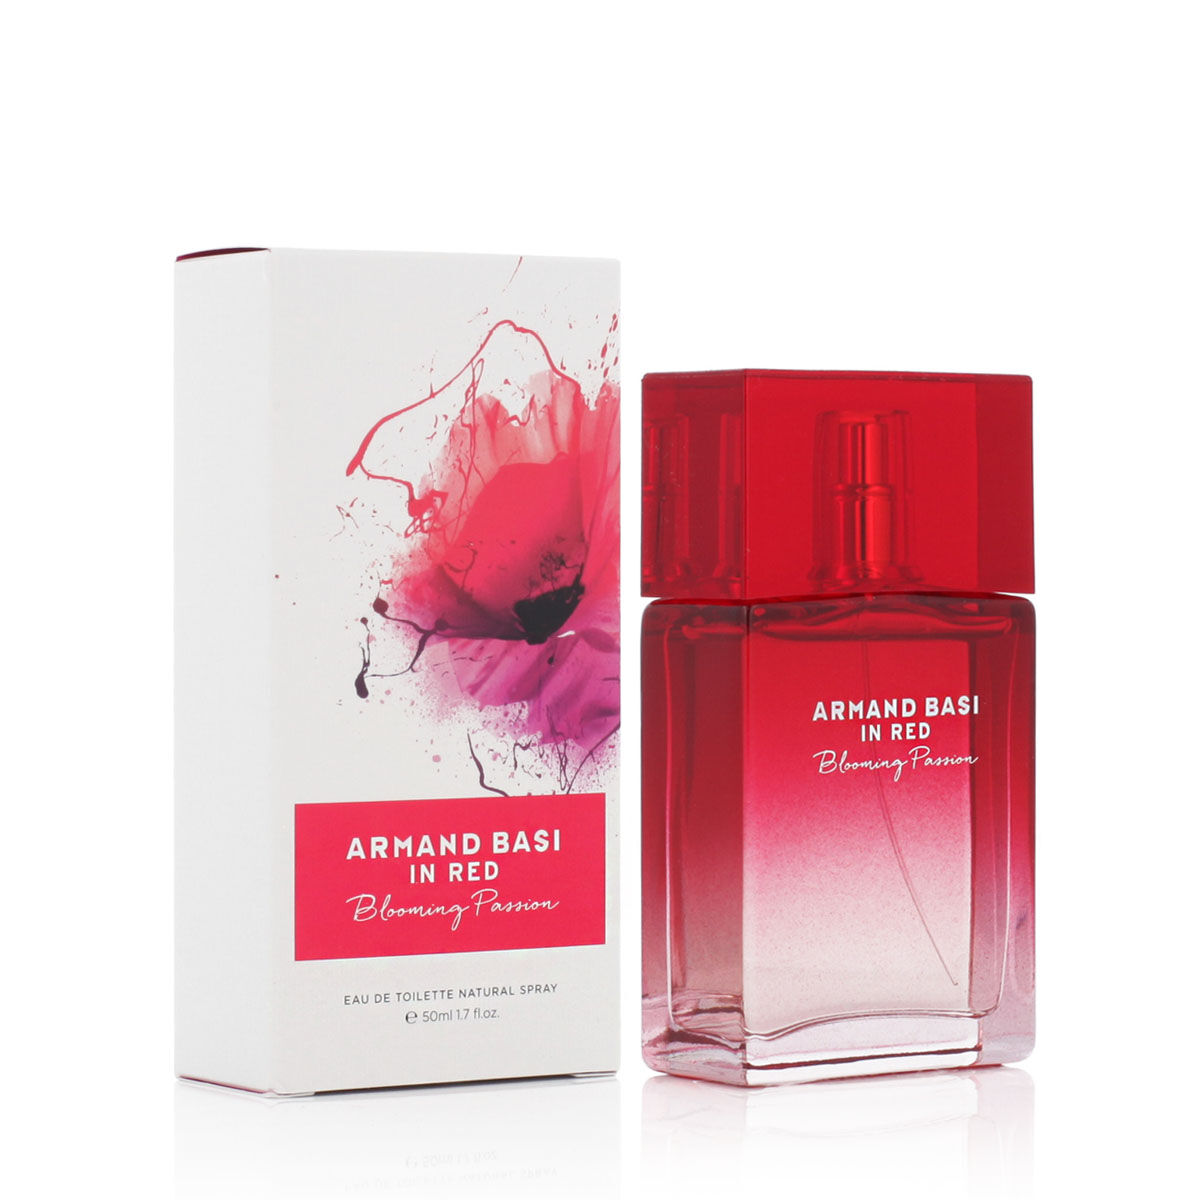 Parfum Femme Armand Basi EDT In Red Blooming Passion 50 ml